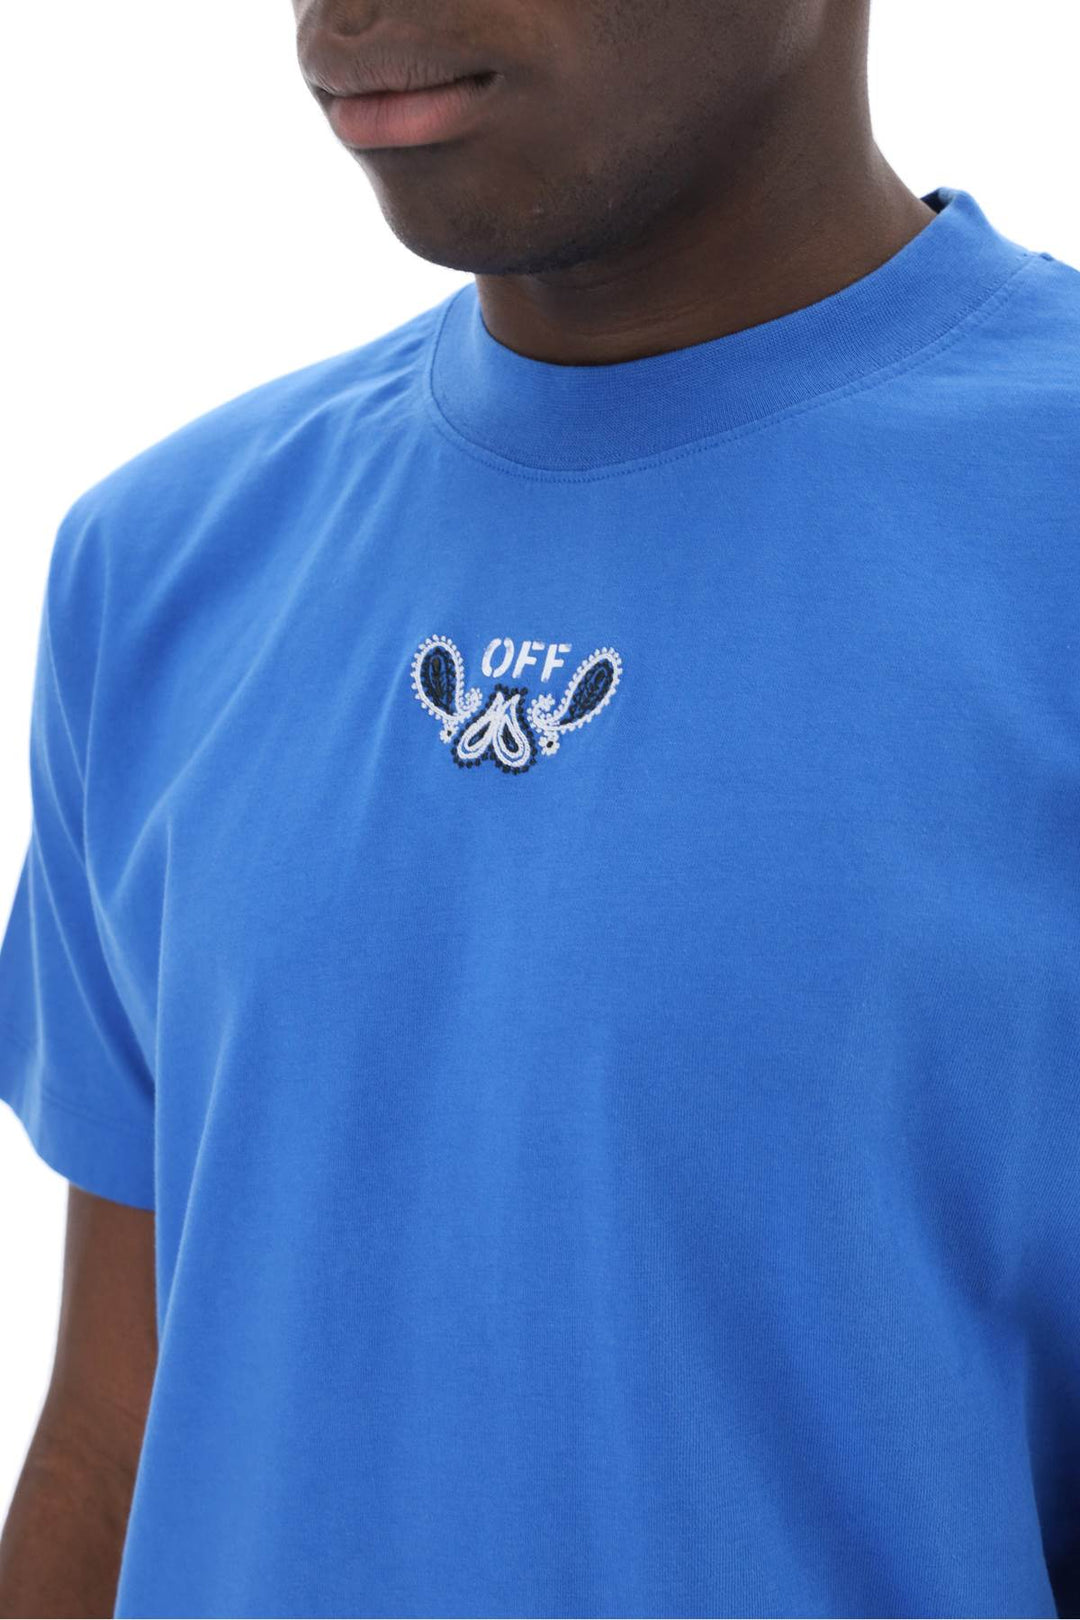 Off White Replace With Double Quotebandana Arrow Pattern T Shirt   Blue